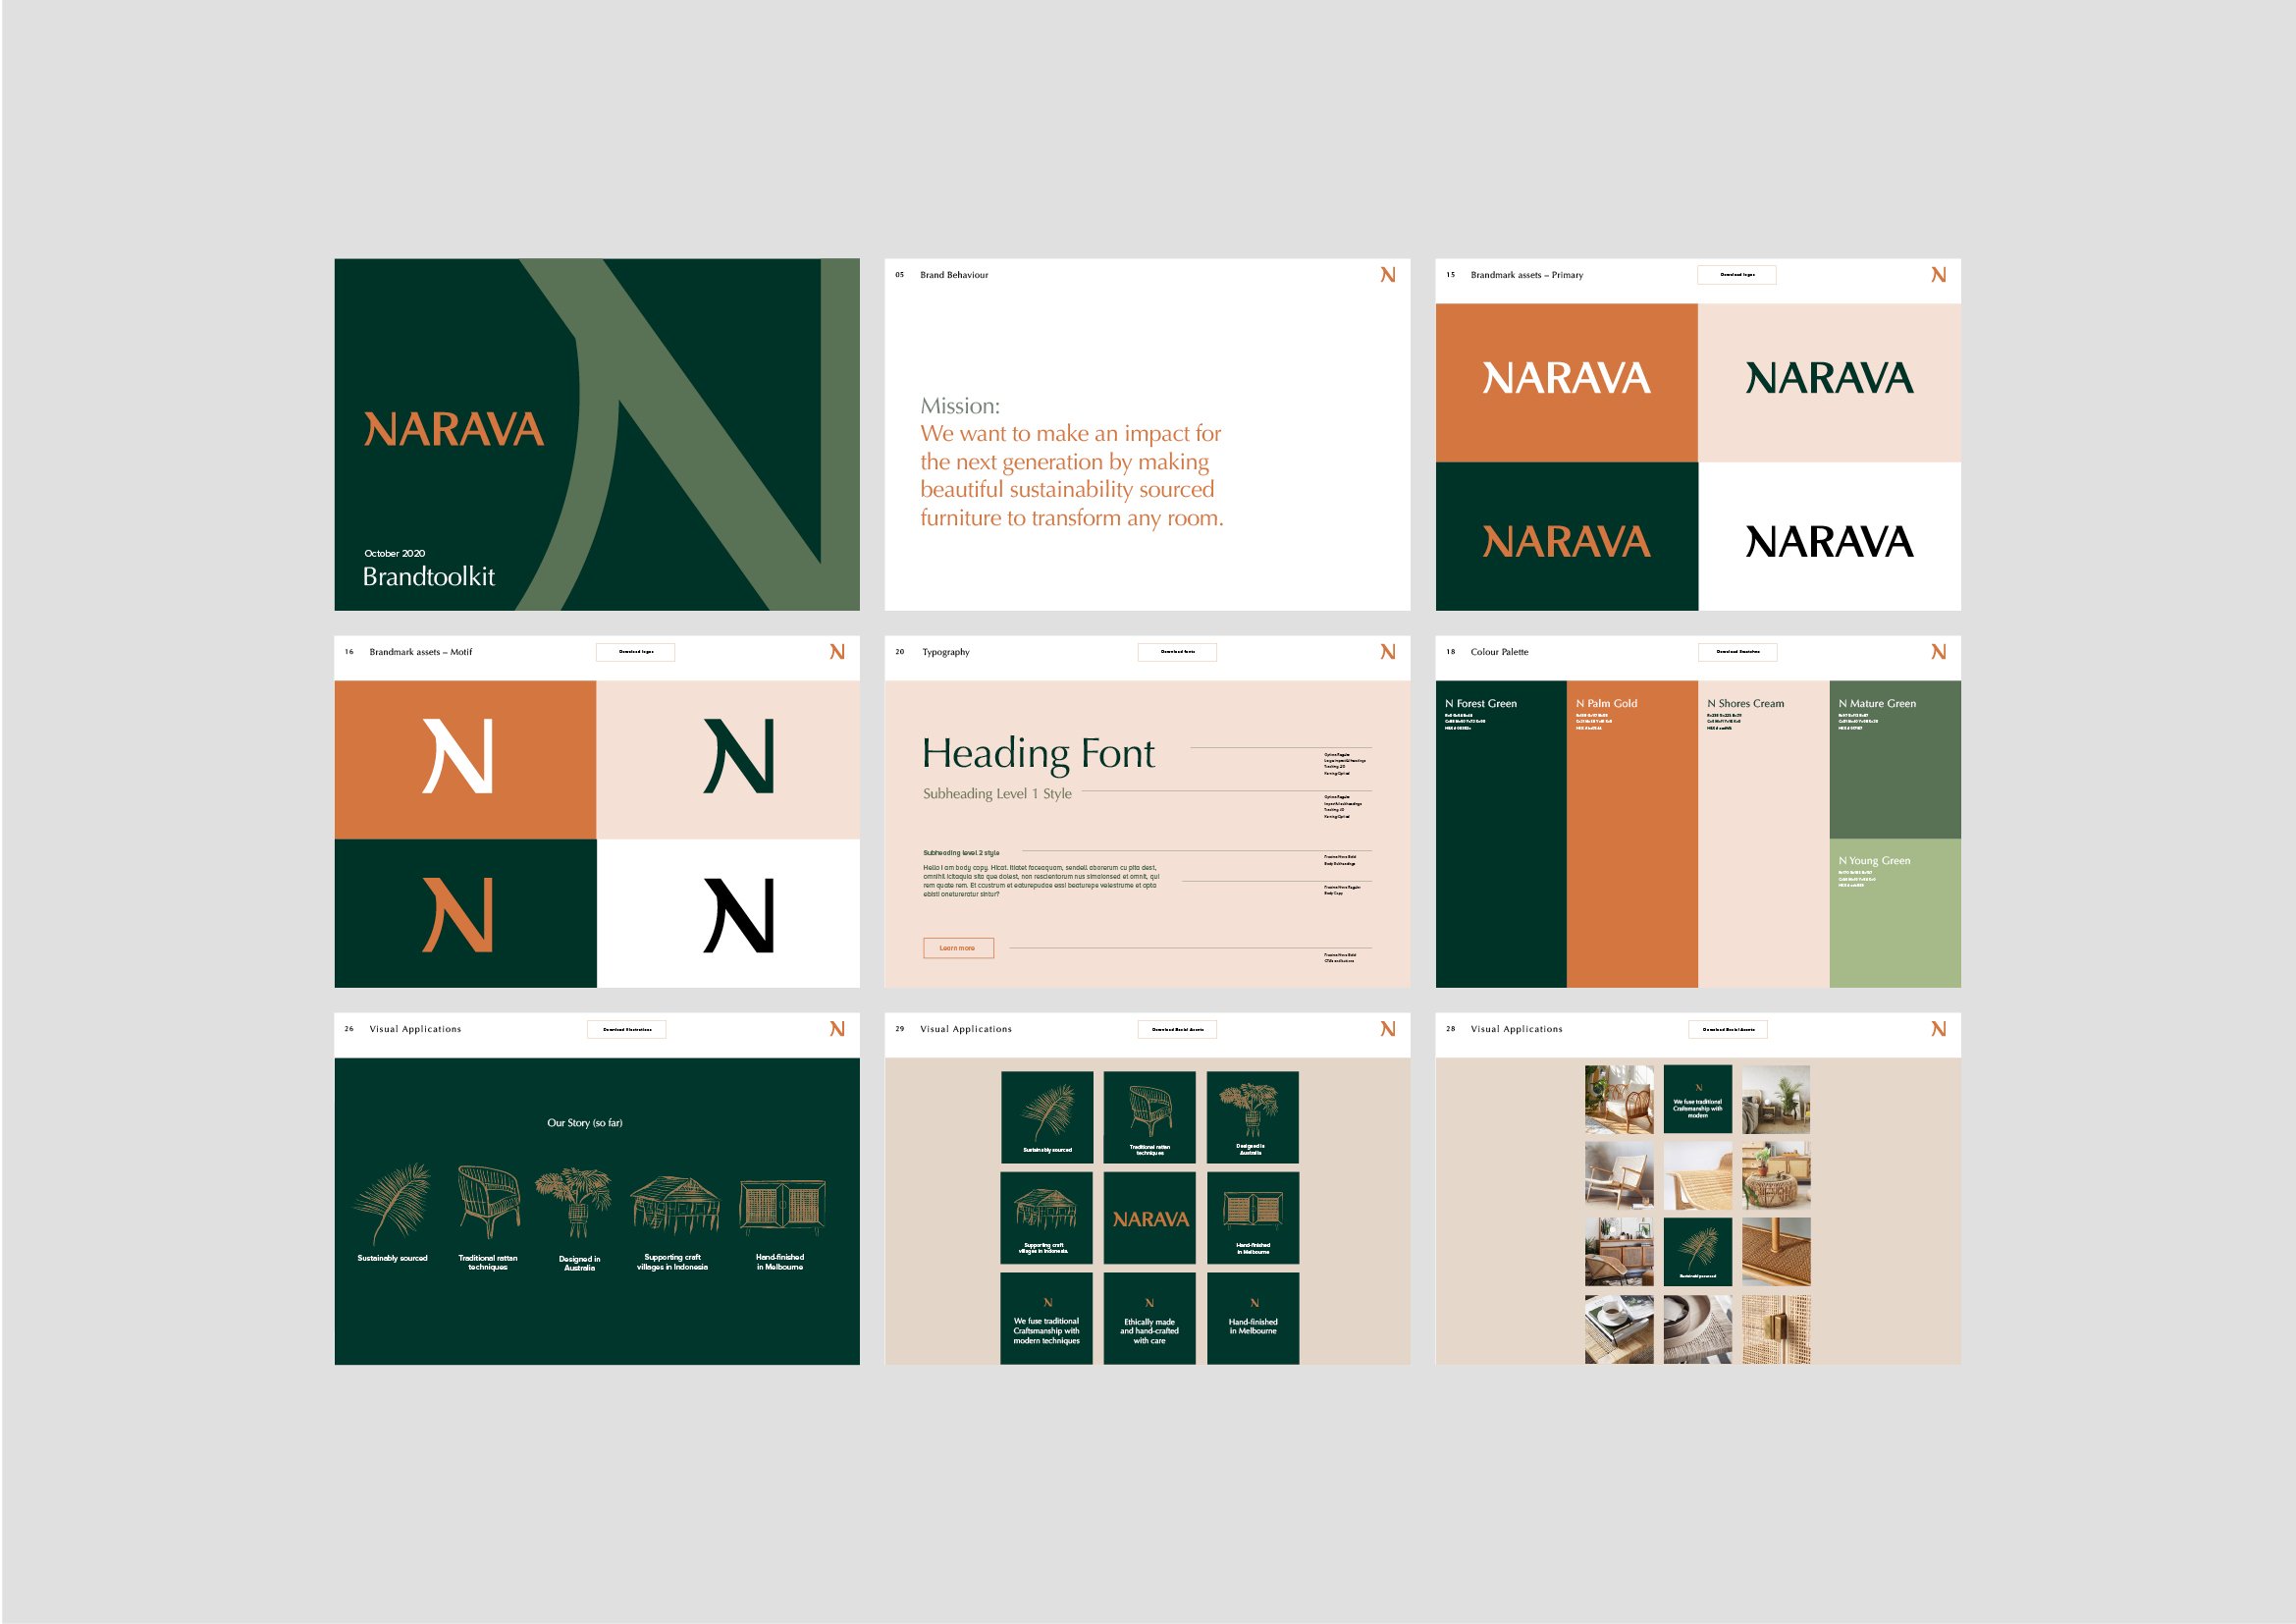 Narava brand guidelines, grid of pages shown